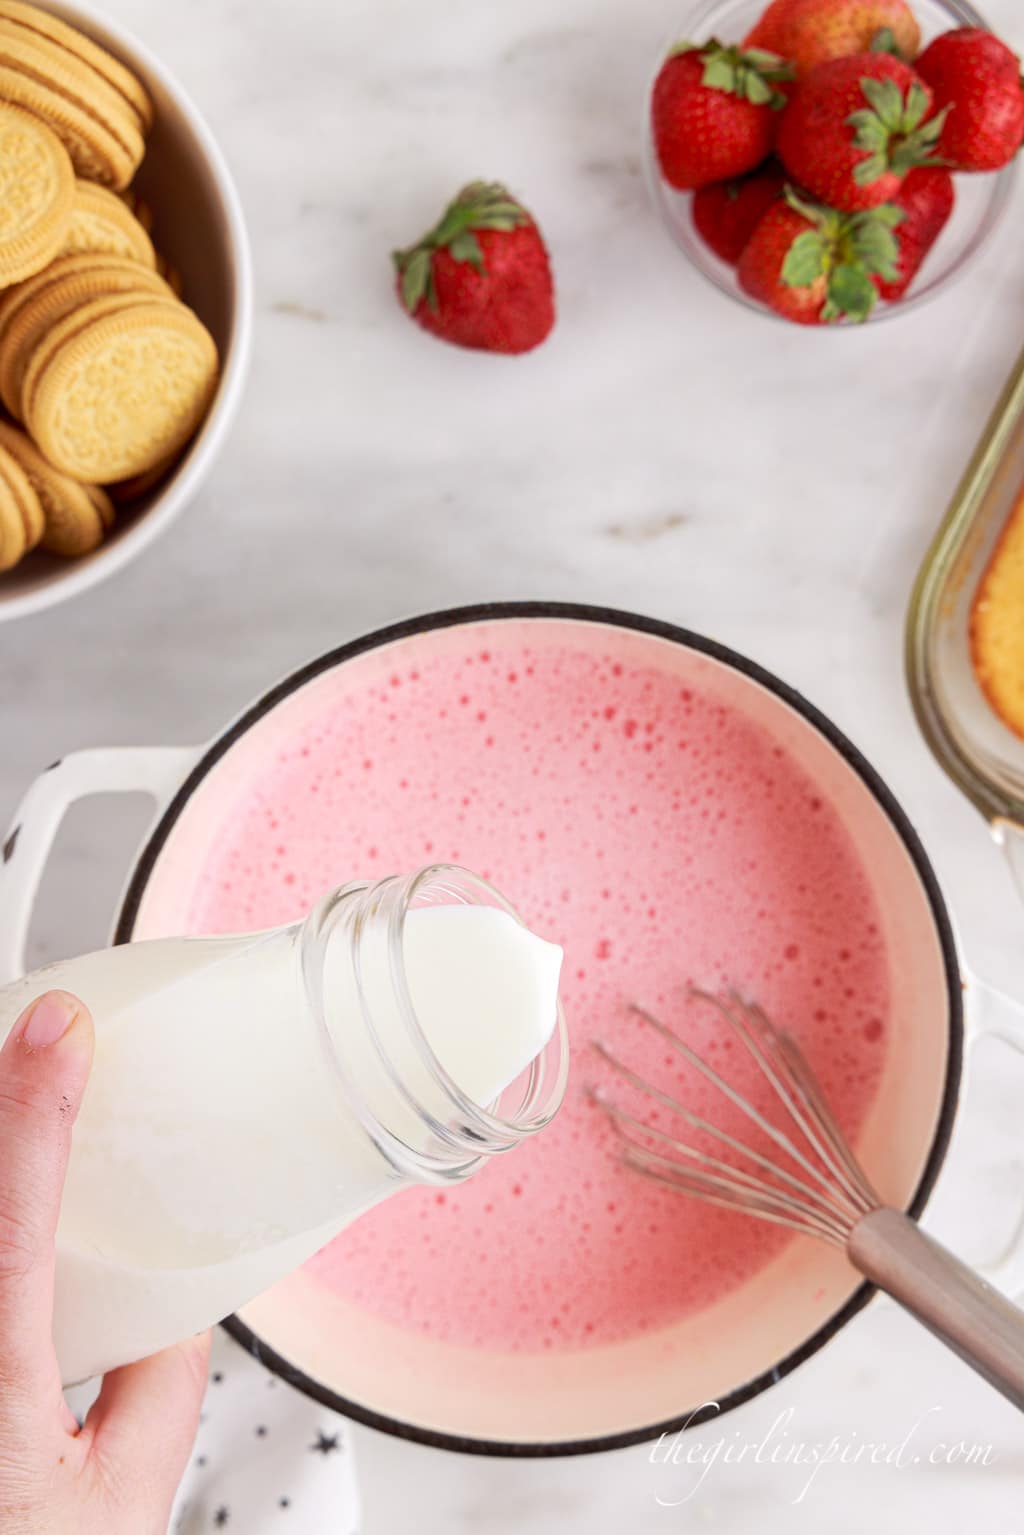 Milk and condensed milk added to the evaporated milk and strawberry gelatin mixture in a saucepan atop a white marble surface with Oreos and fresh strawberries in the background